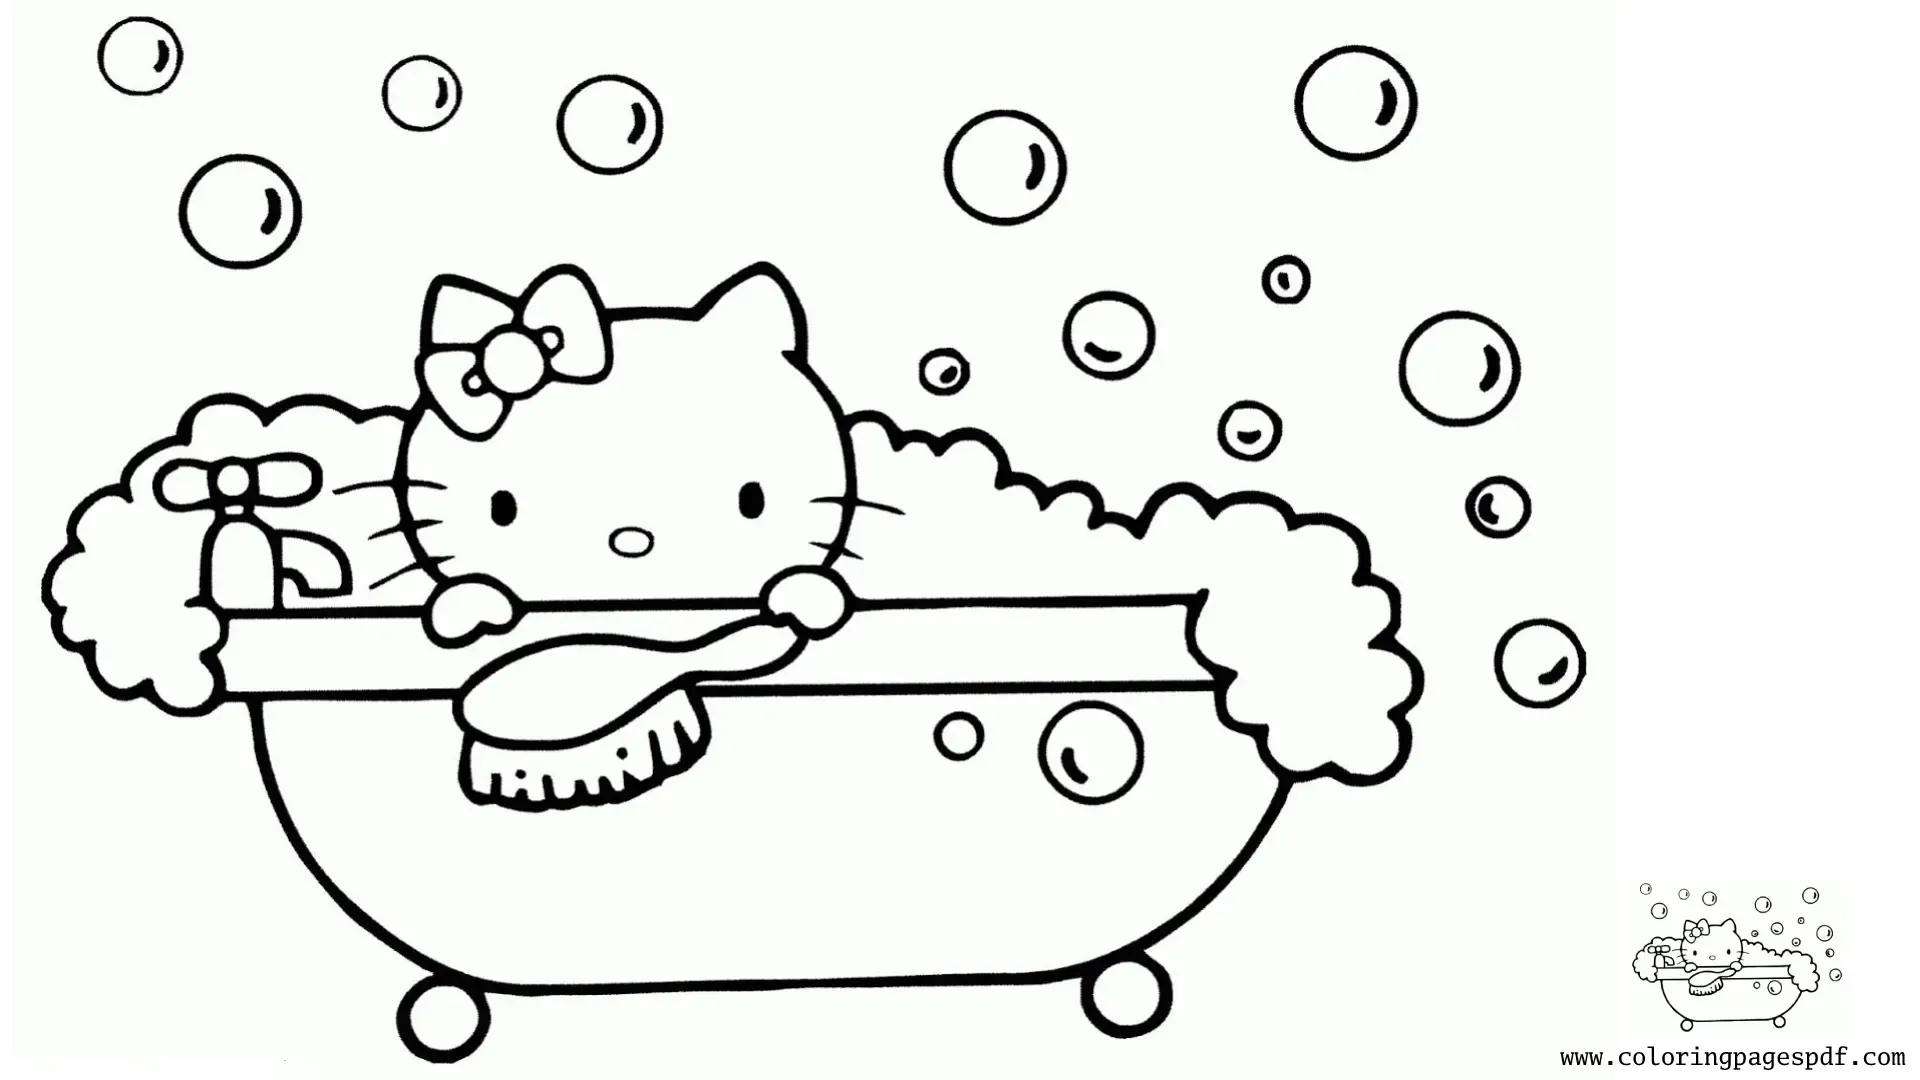 Coloring Page Of Hello Kitty In The Bathtub